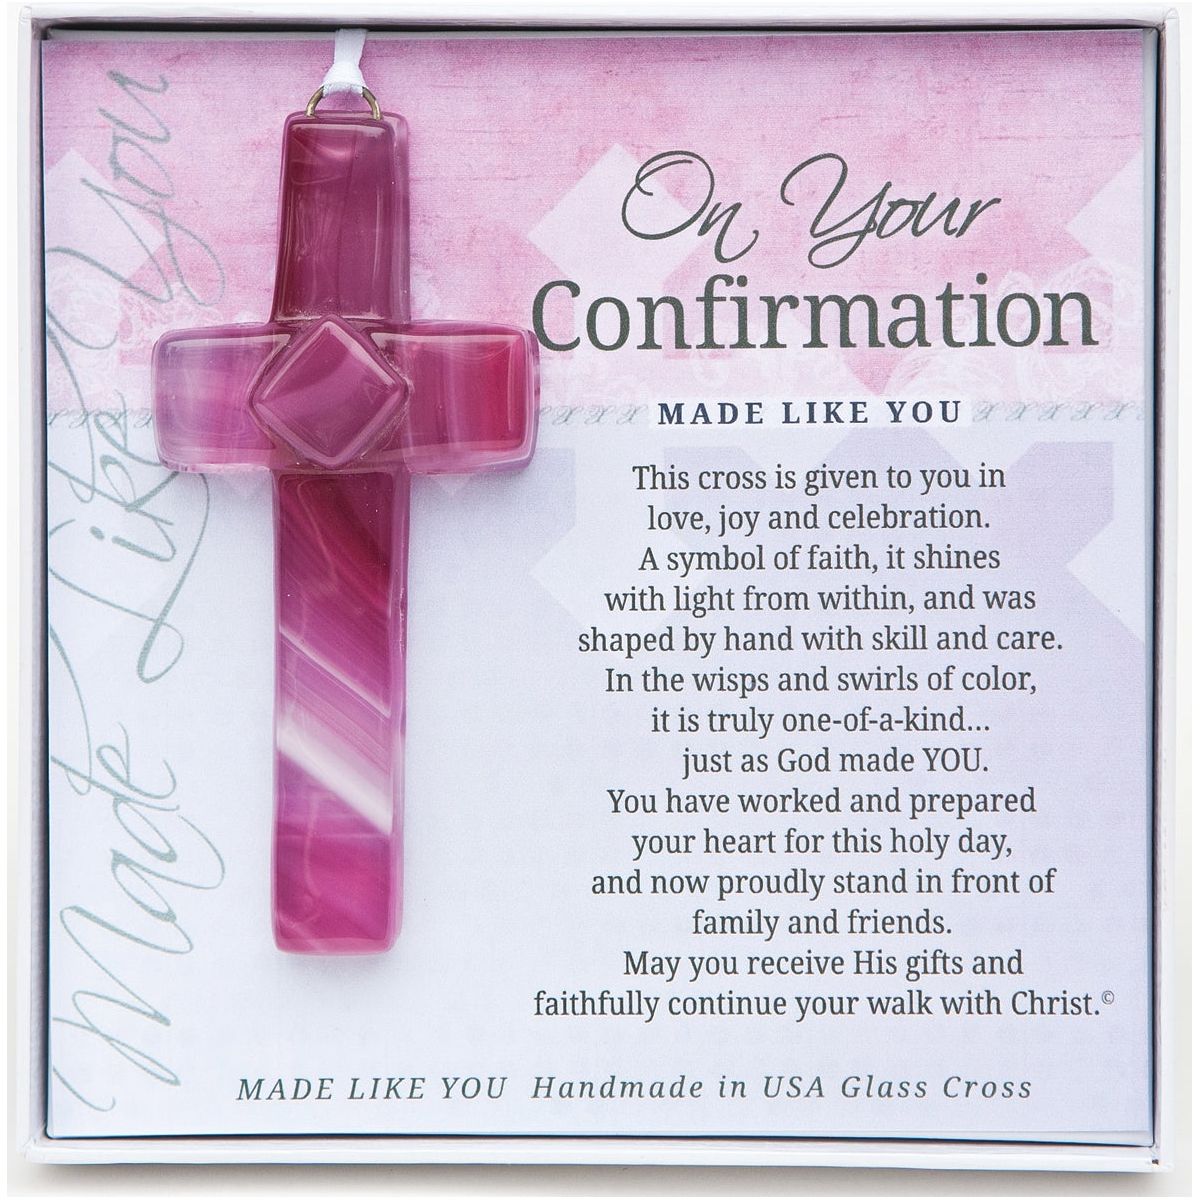 Confirmation Gift - Handmade 4" pink glass cross and "On Your Confirmation" sentiment in white box with clear lid.